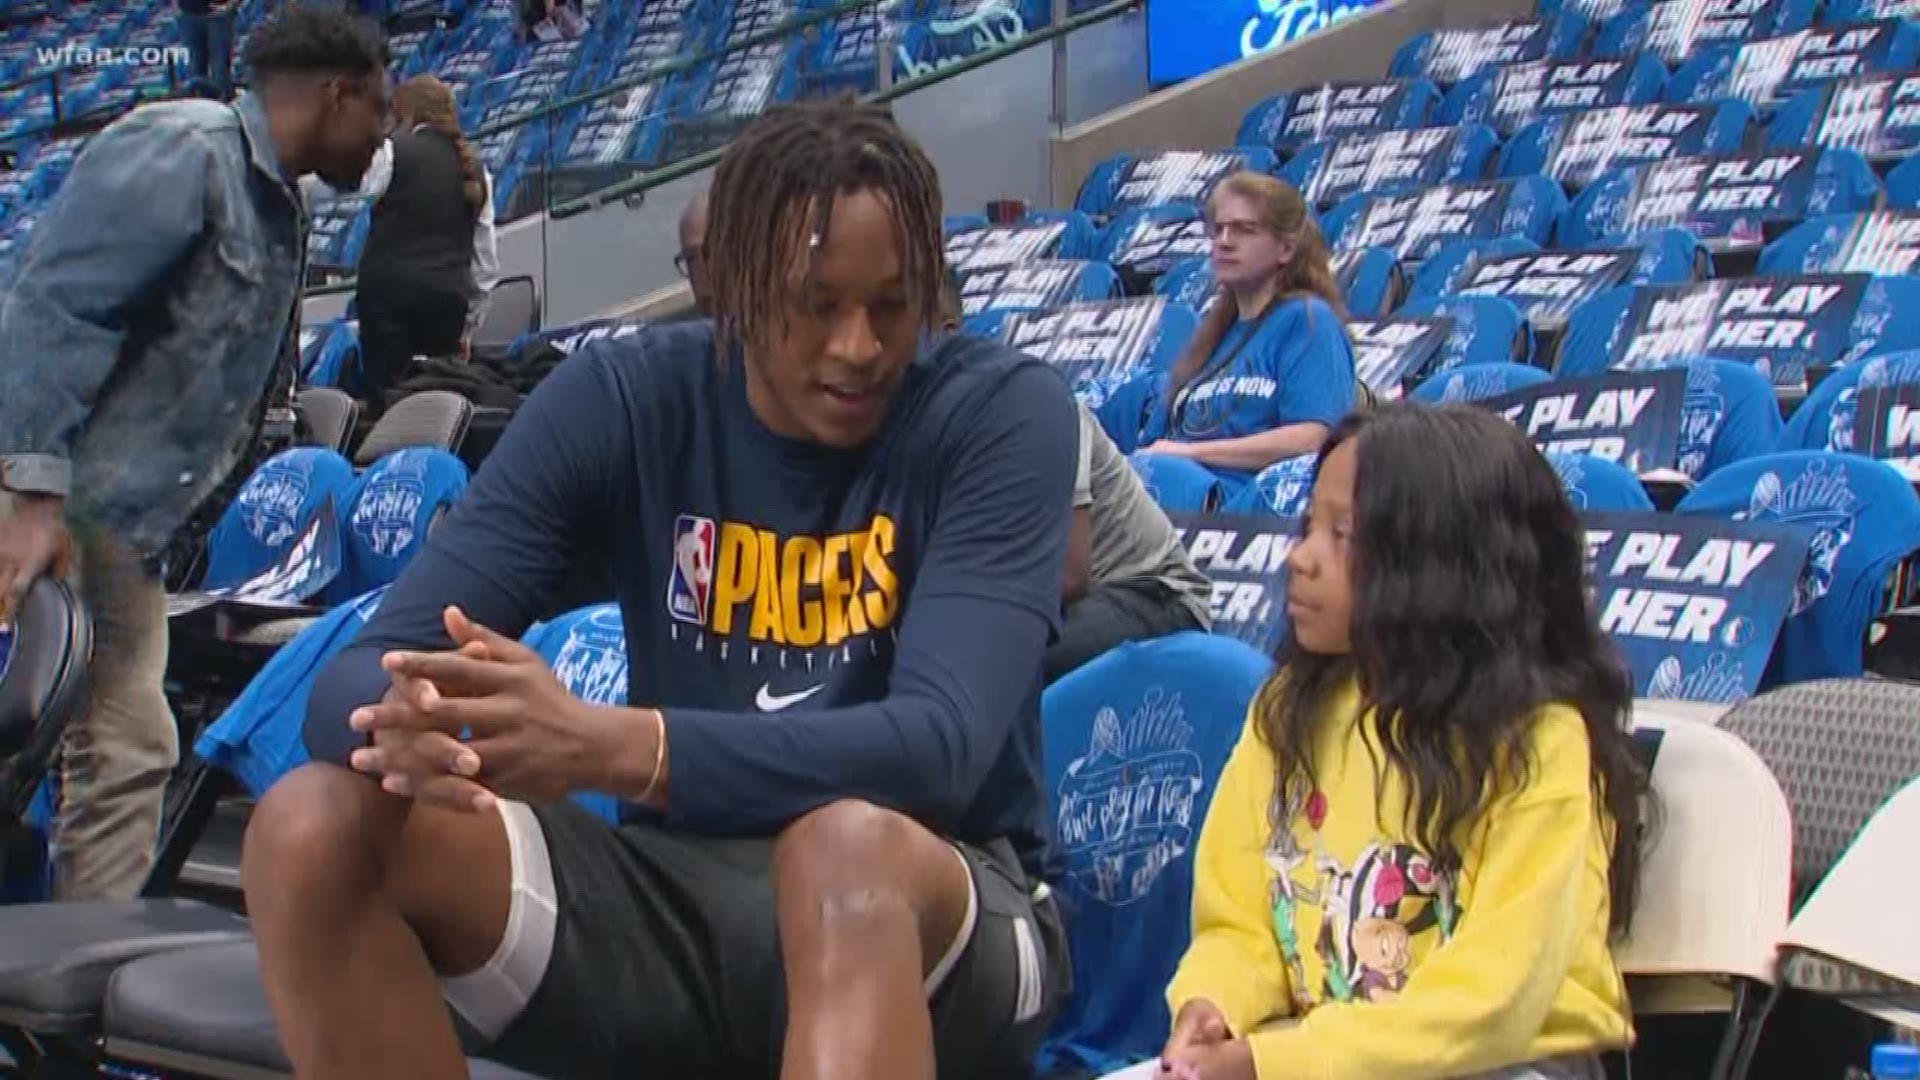 A'myah Moon met Myles Turner Sunday — and got to hear a pep talk from the Indiana Pacers player.